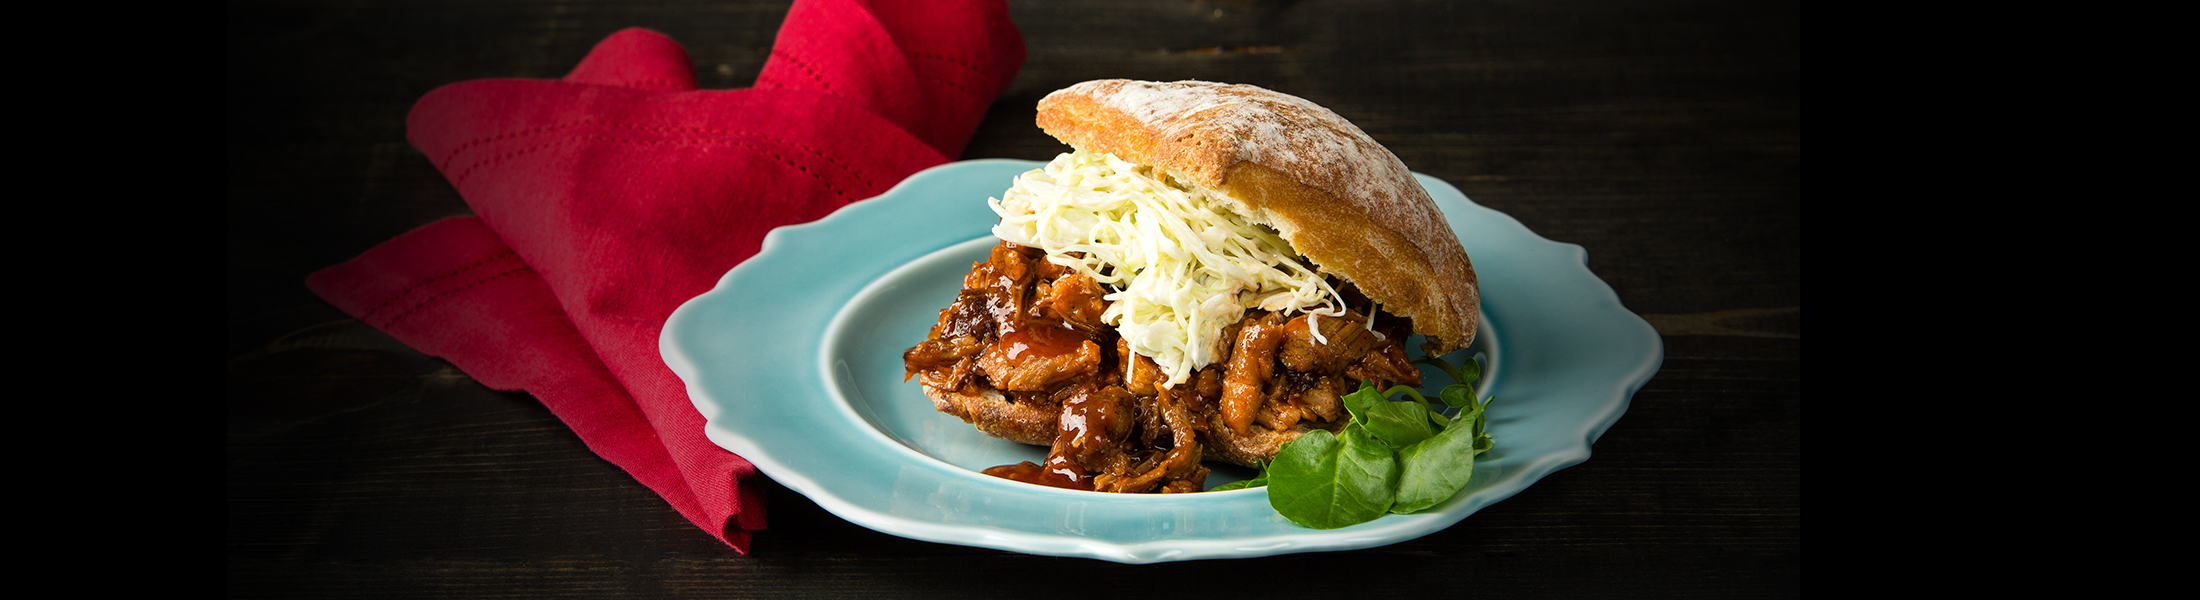 Rodney Strong - Oven-Roasted Pulled Pork Sandwiches with Garlic Slaw